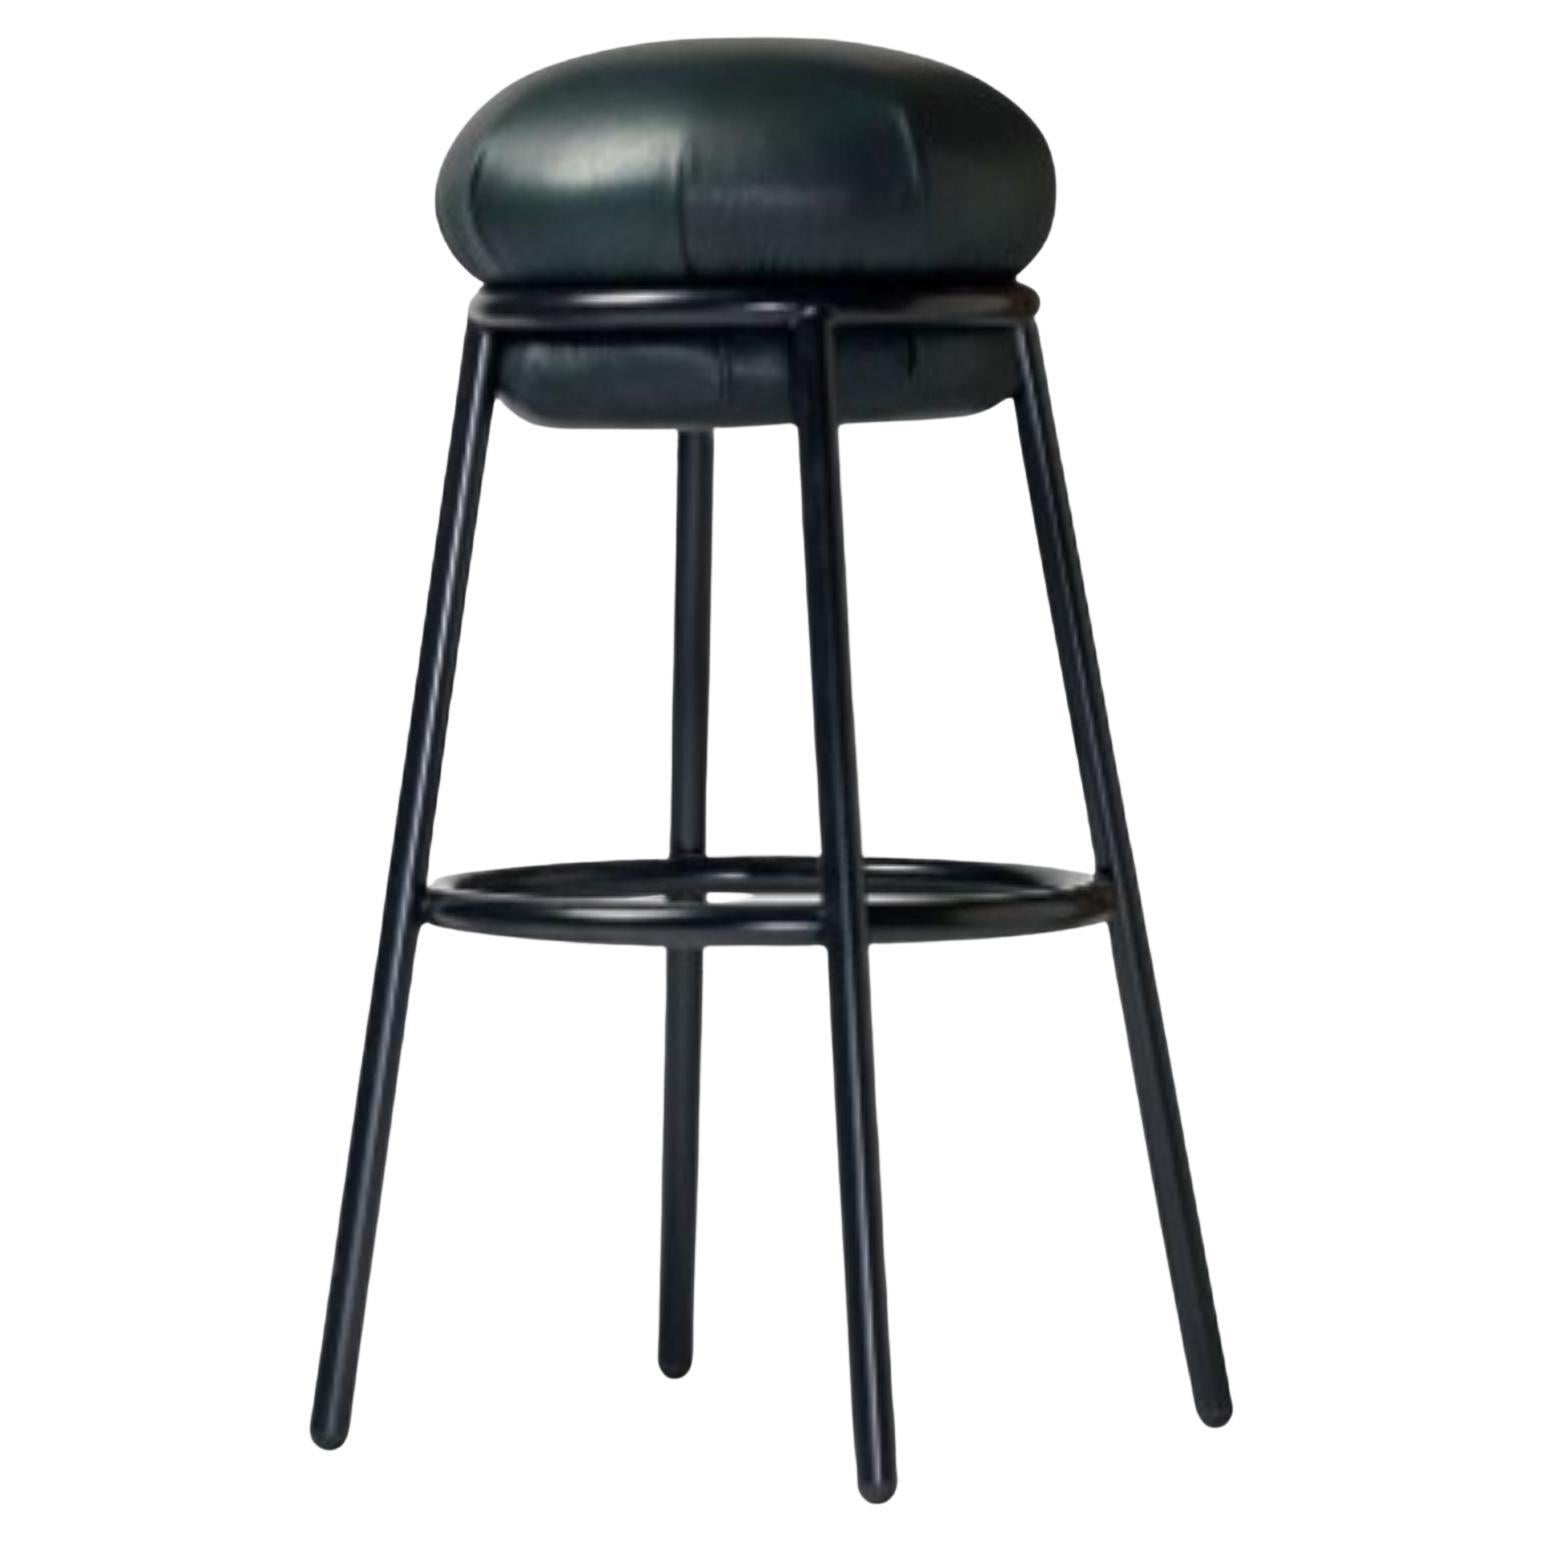 Grasso All Black Stool by Stephen Burks For Sale